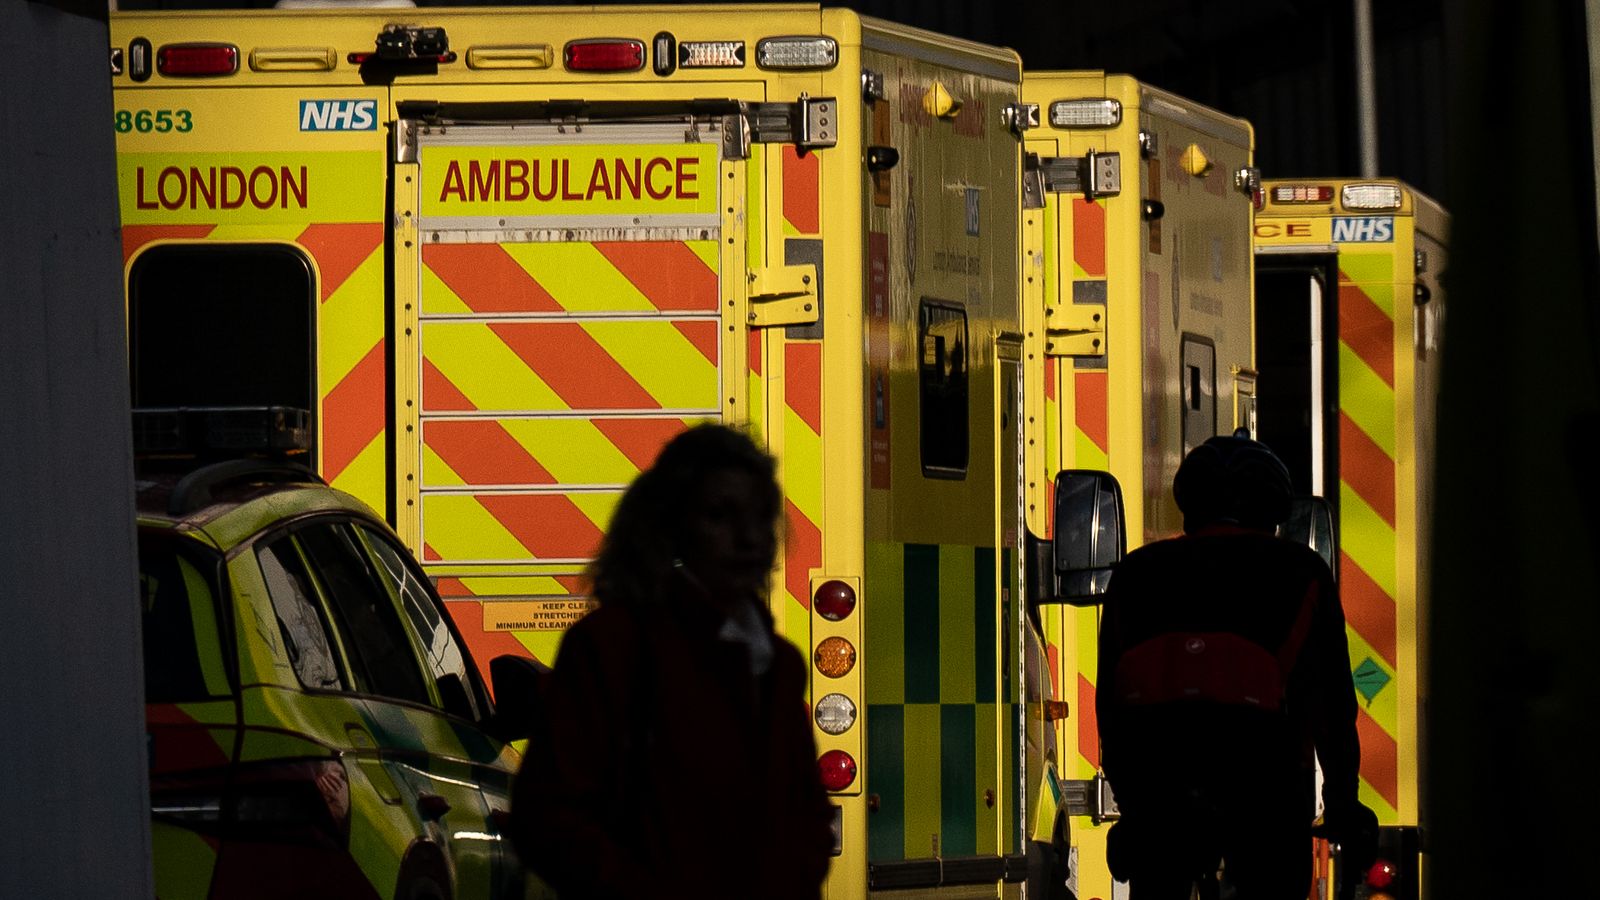 Almost 400,000 patients spend 24 hours or more in A&E, figures show